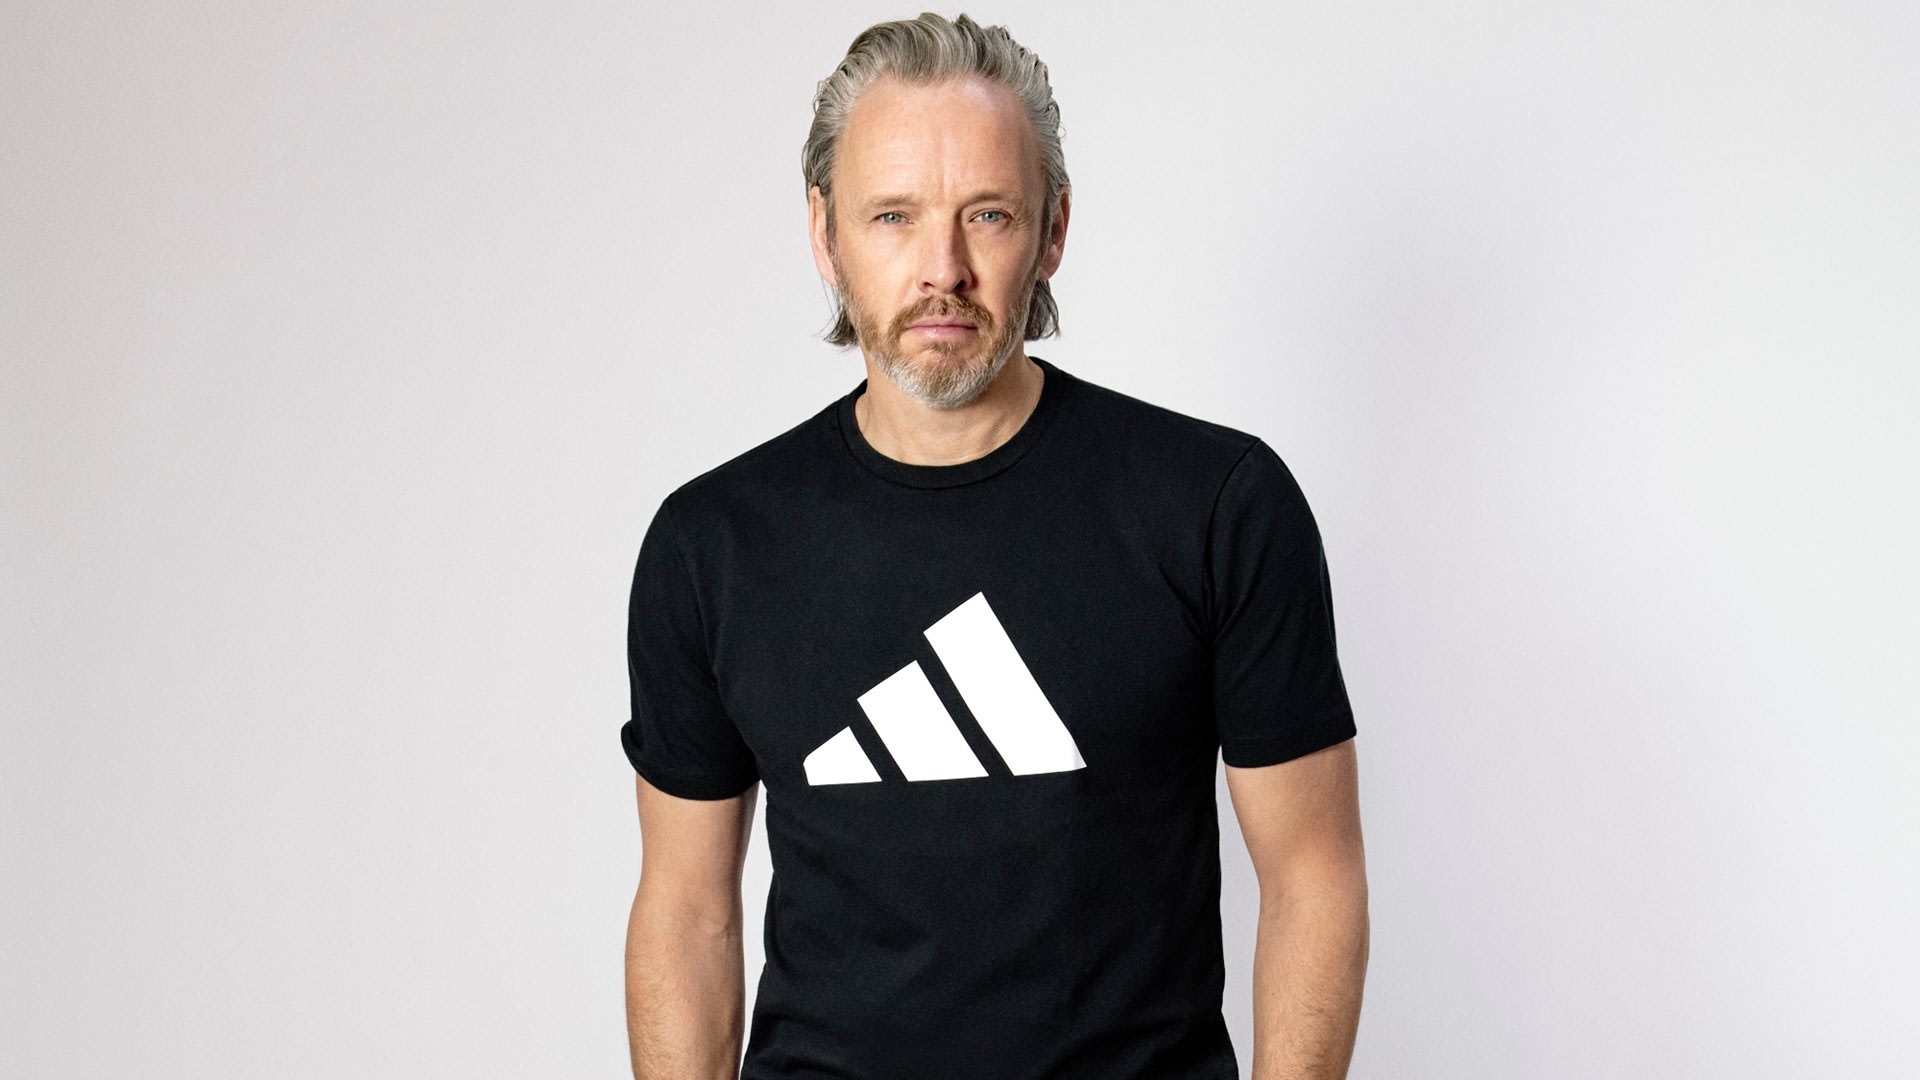 Adidas chief creative officer Alasdhair Willis in March 2022 wearing a black Adidas tee shirt with a white Adidas mountain logo